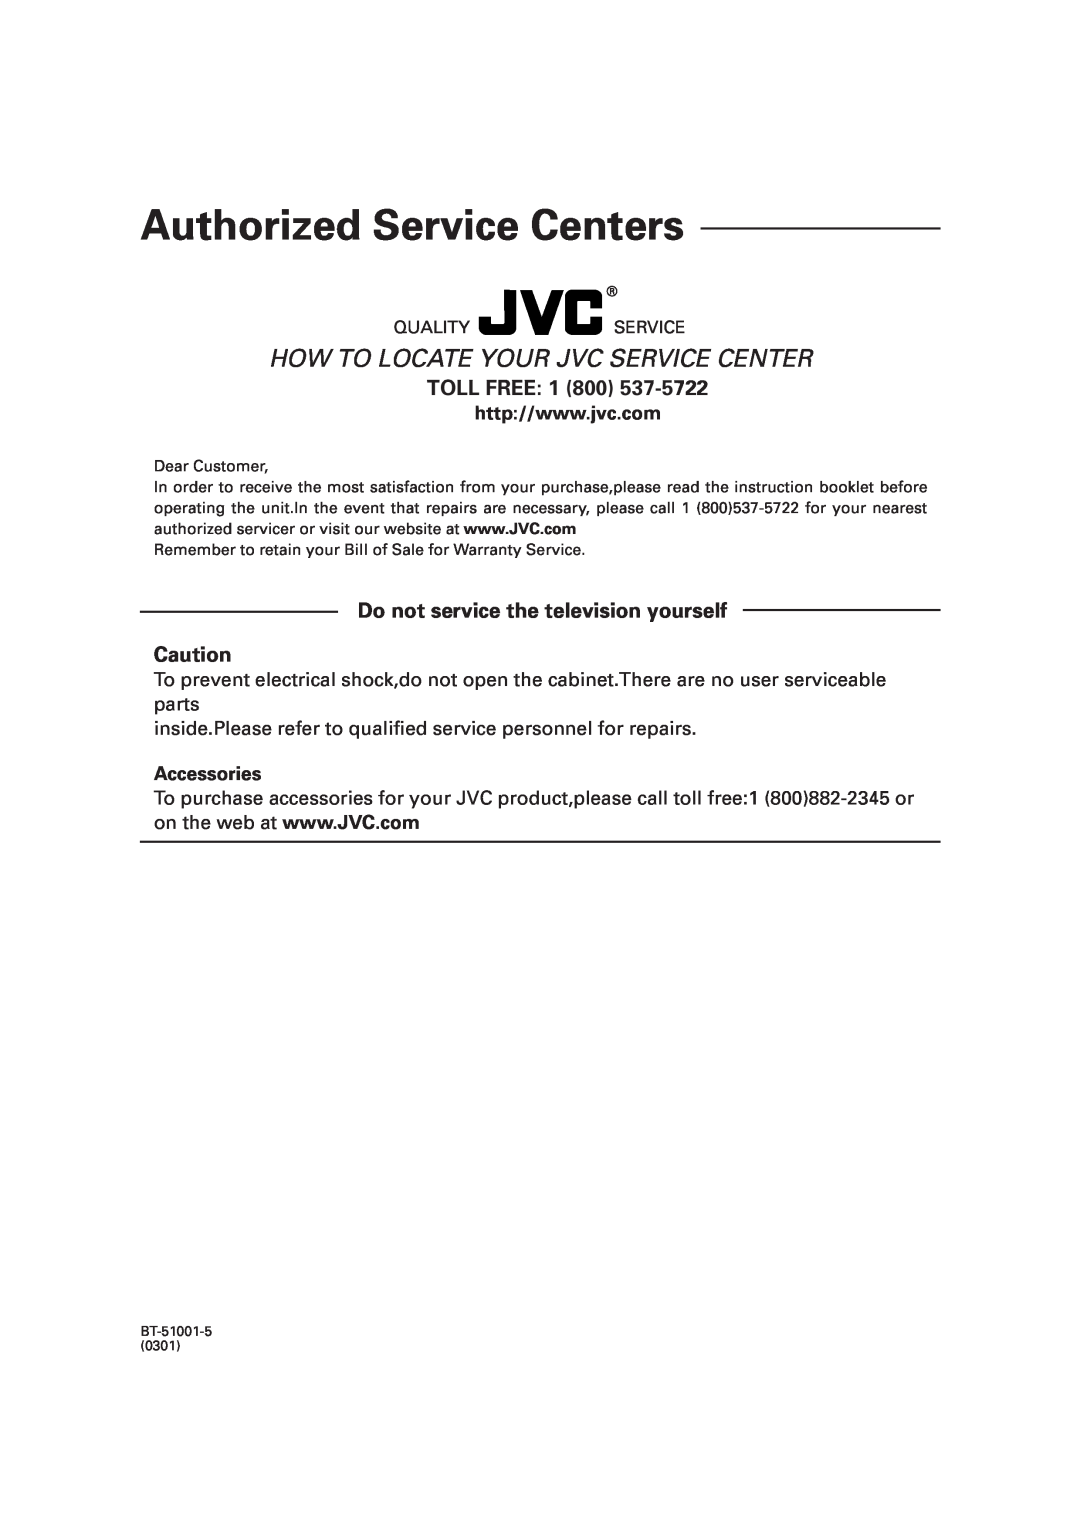 JVC FS-H35 manual Toll Free, Do not service the television yourself, Authorized Service Centers, Accessories 